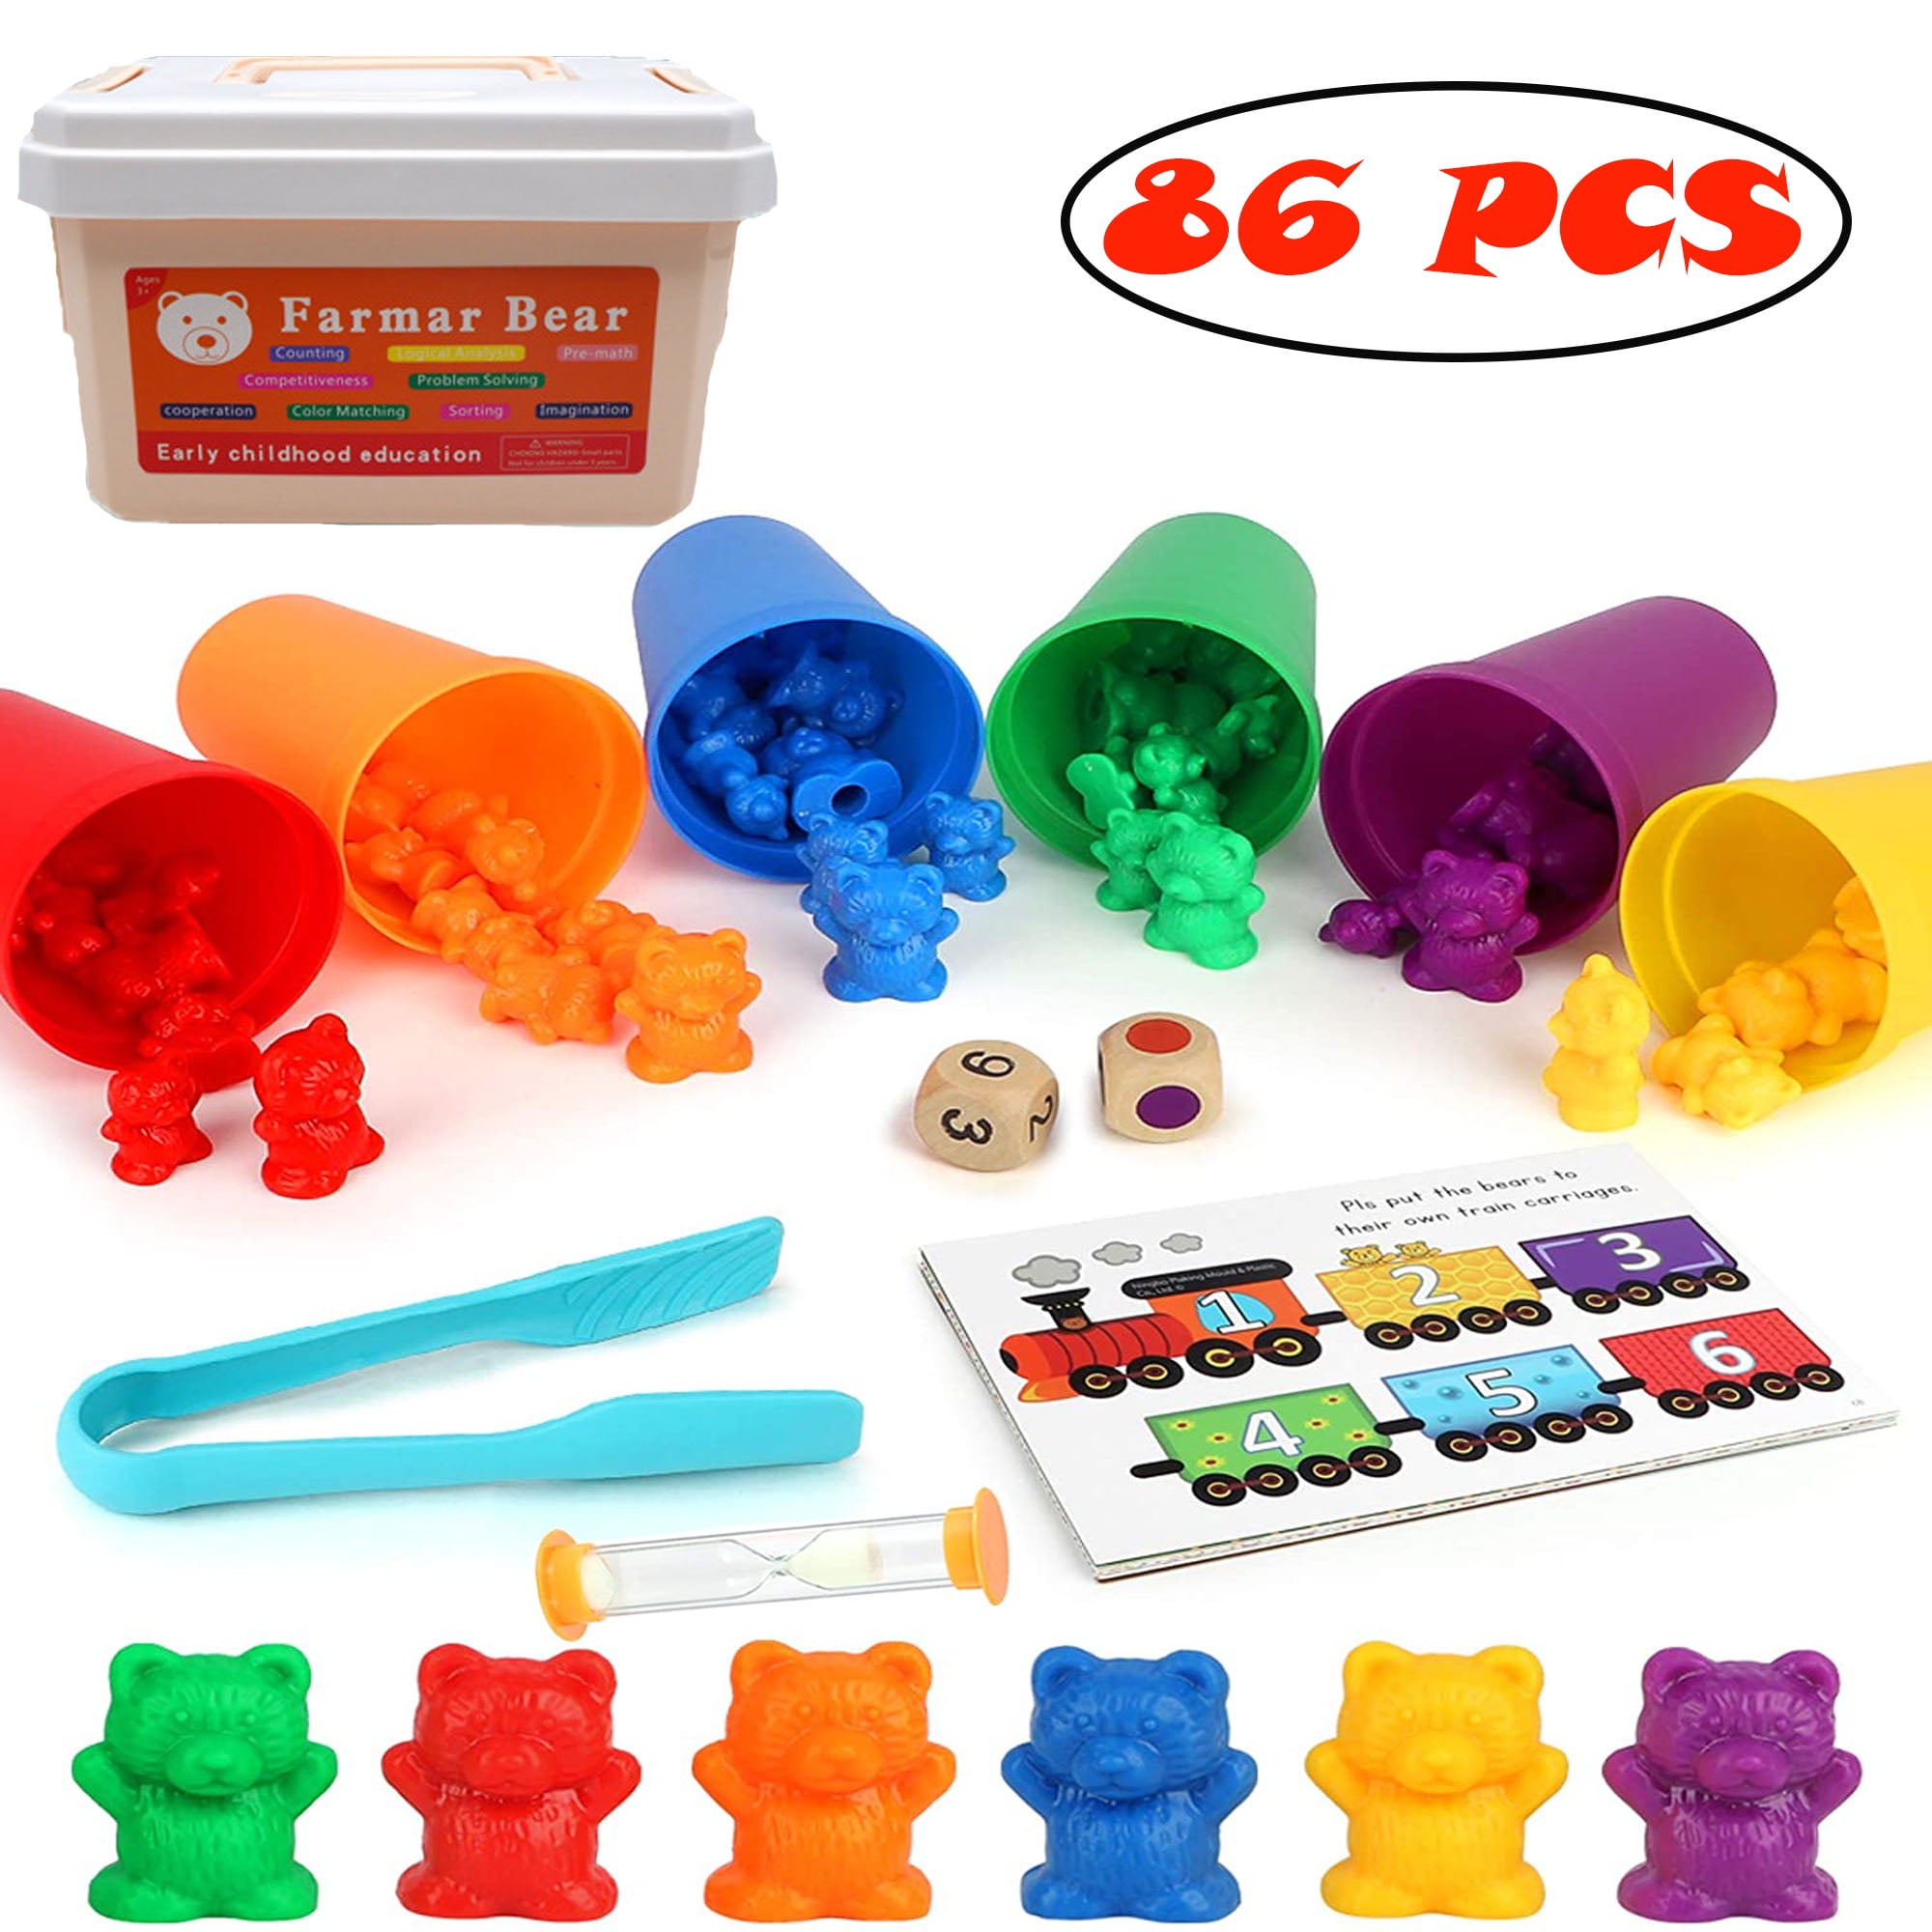 SUNHE YHK Rainbow Counting Bears with Matching Sorting Cups Number Color Recognition STEM Educational Toys for Toddlers and Kids 90 Piece Kit 